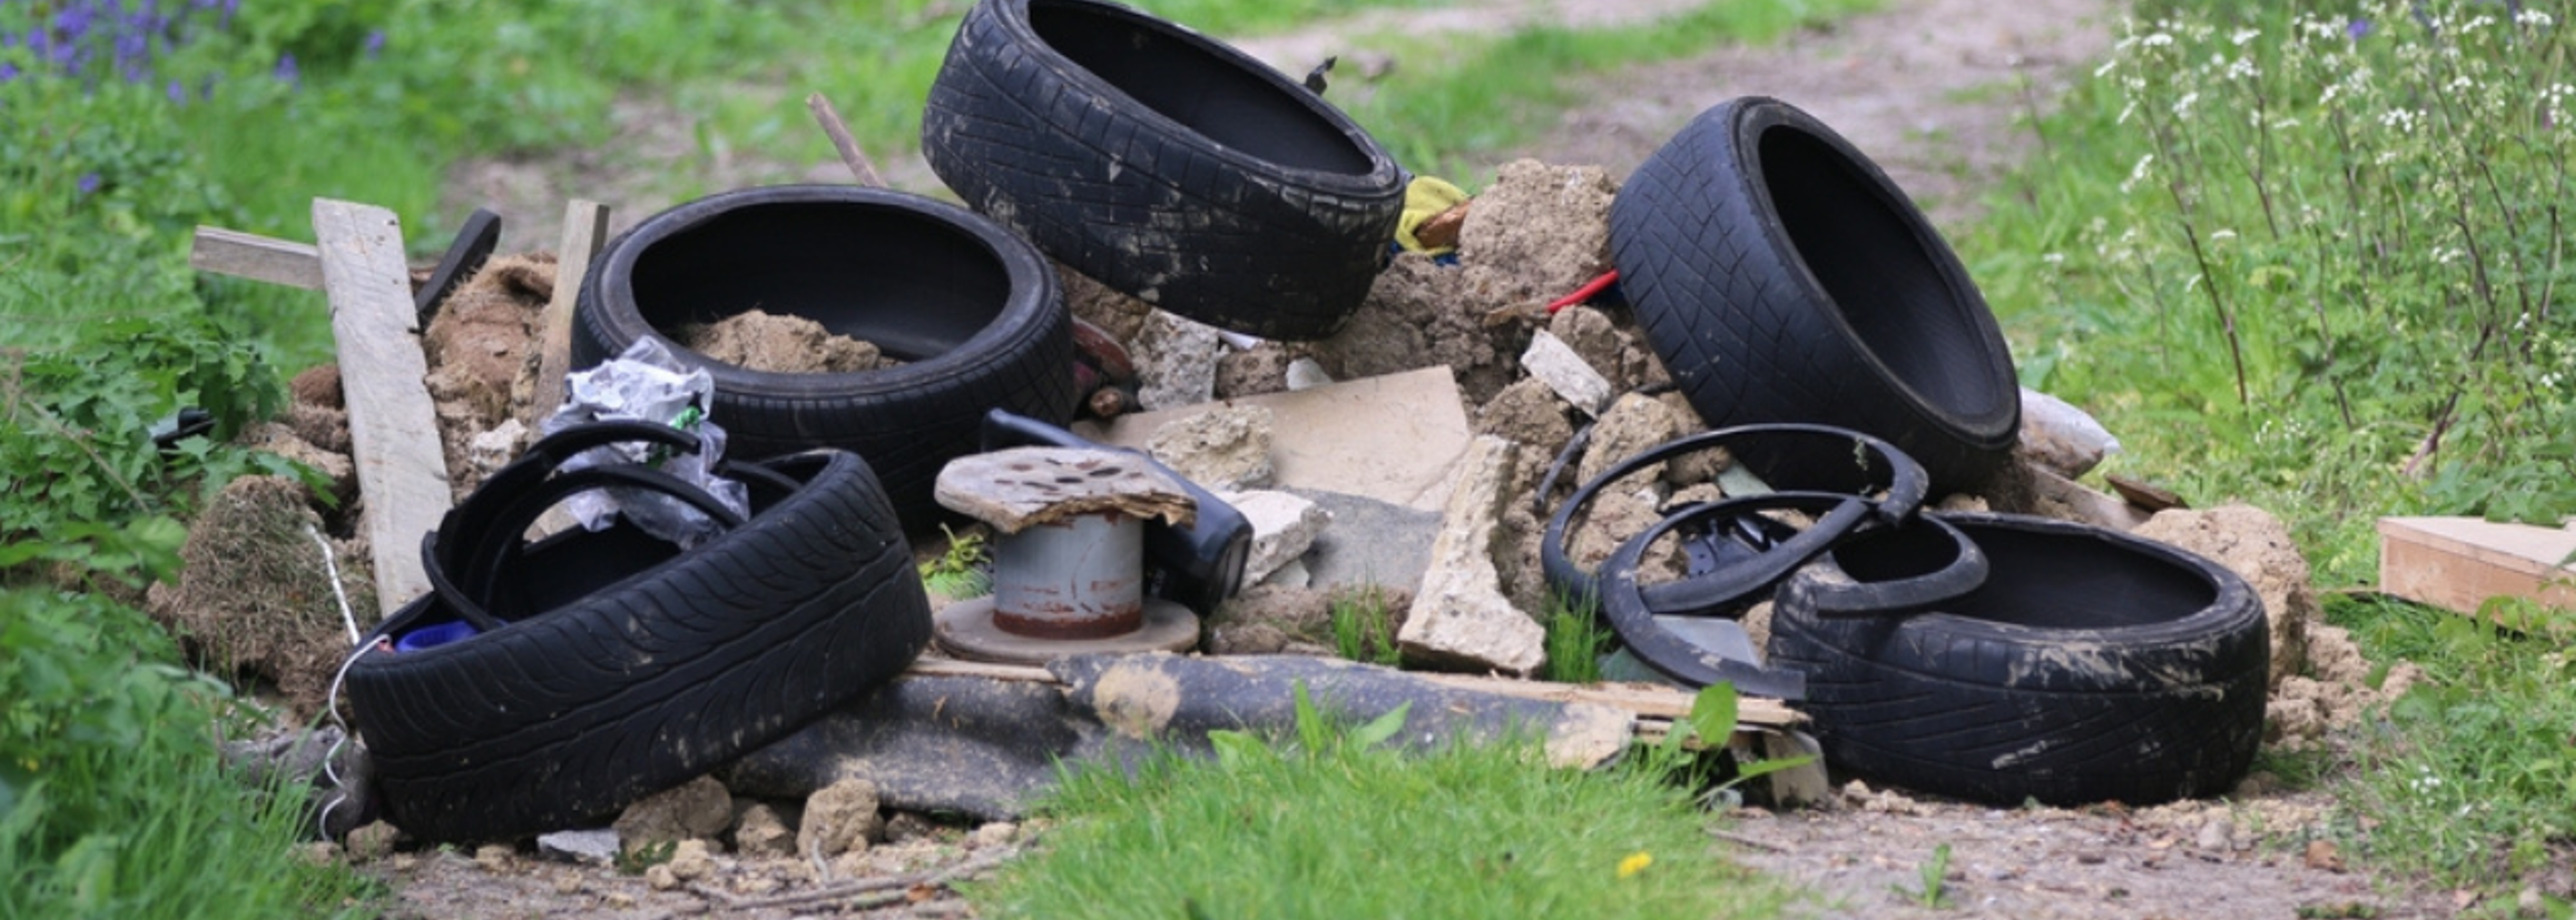 Farmers struggle as fly-tipping is “out of control”